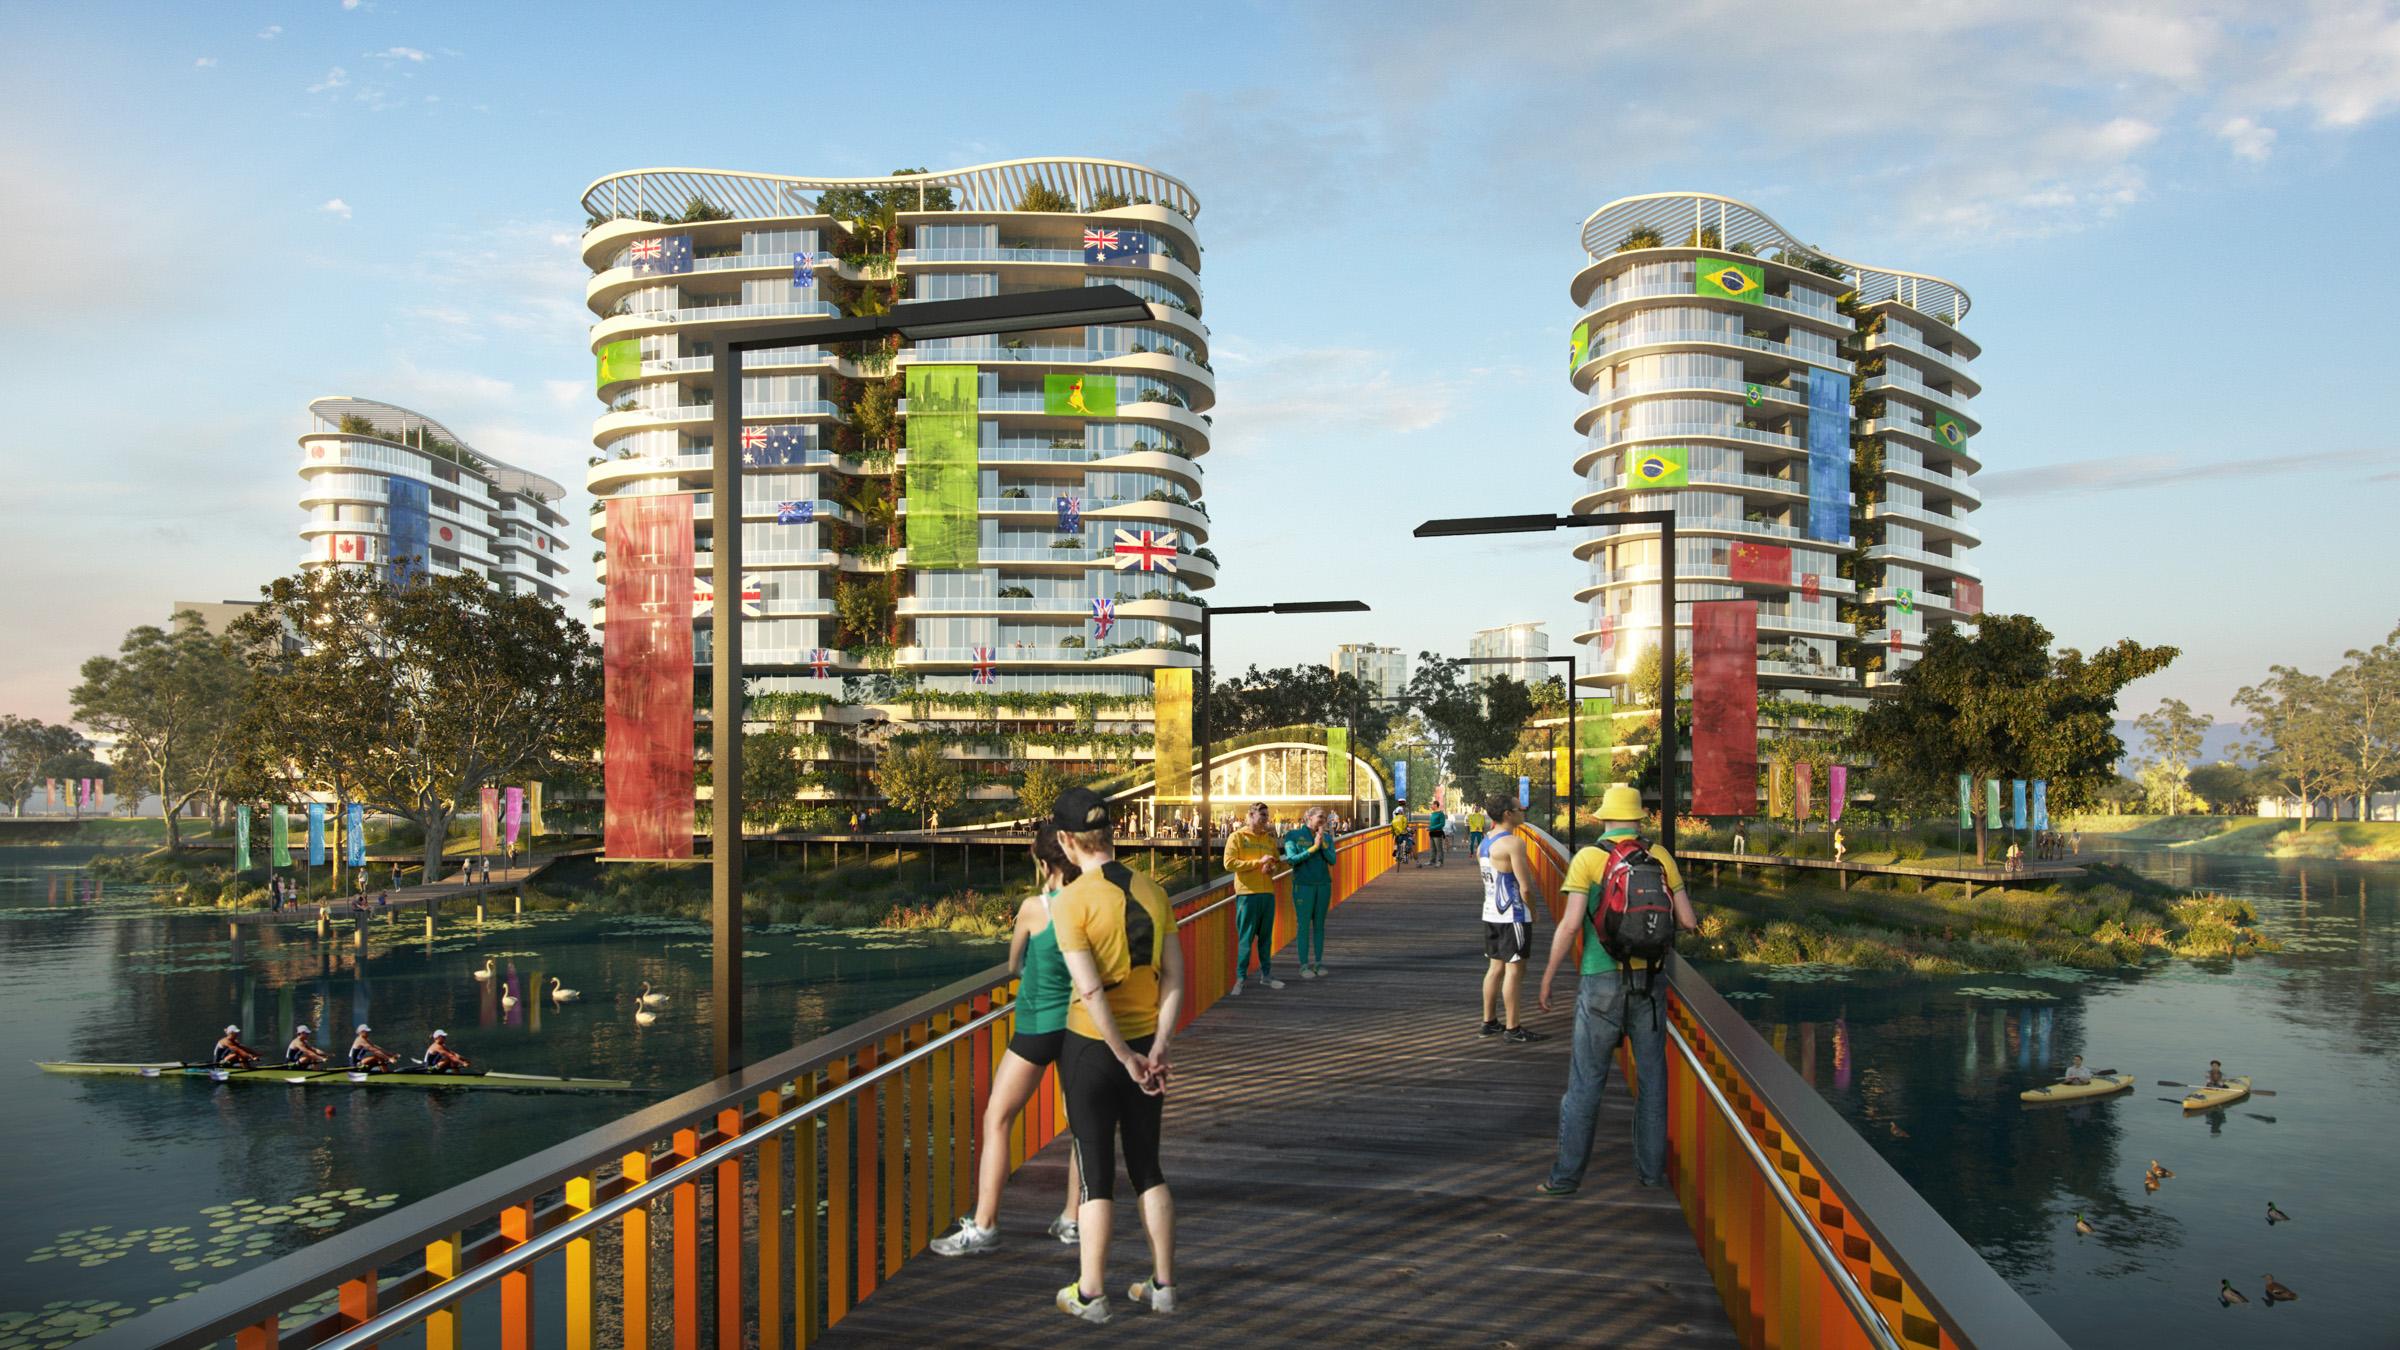 Computer-rendered image from the lake outside the Gold Coast Athletes Village, decorated in flags, with athletes walking and training in row boats